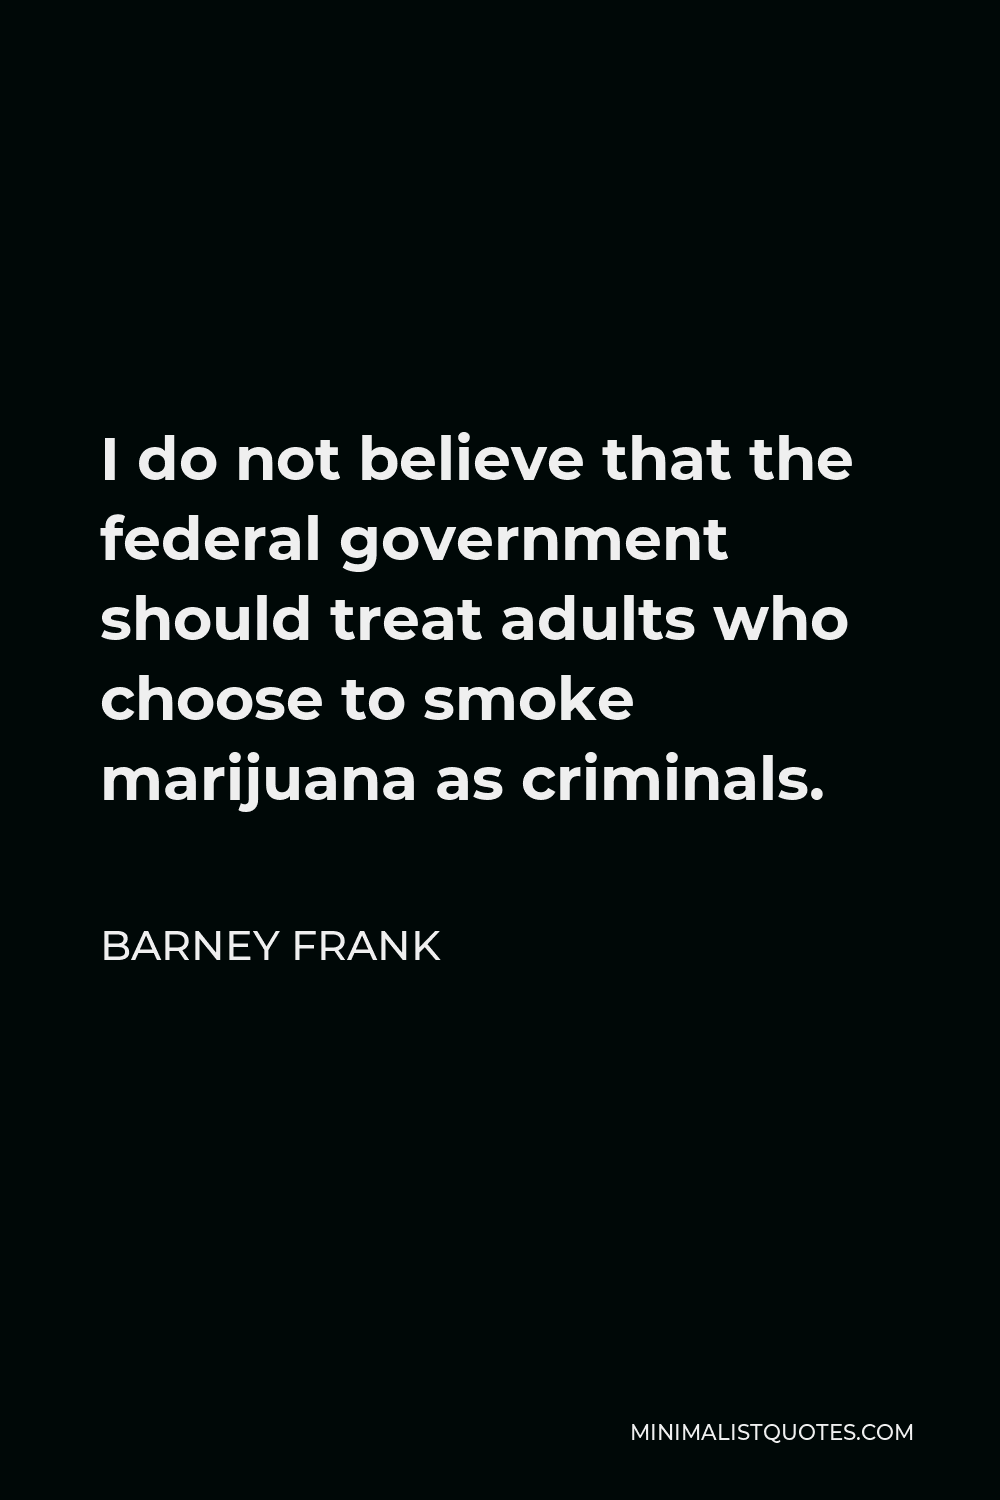 Barney Frank Quote - I do not believe that the federal government should treat adults who choose to smoke marijuana as criminals.